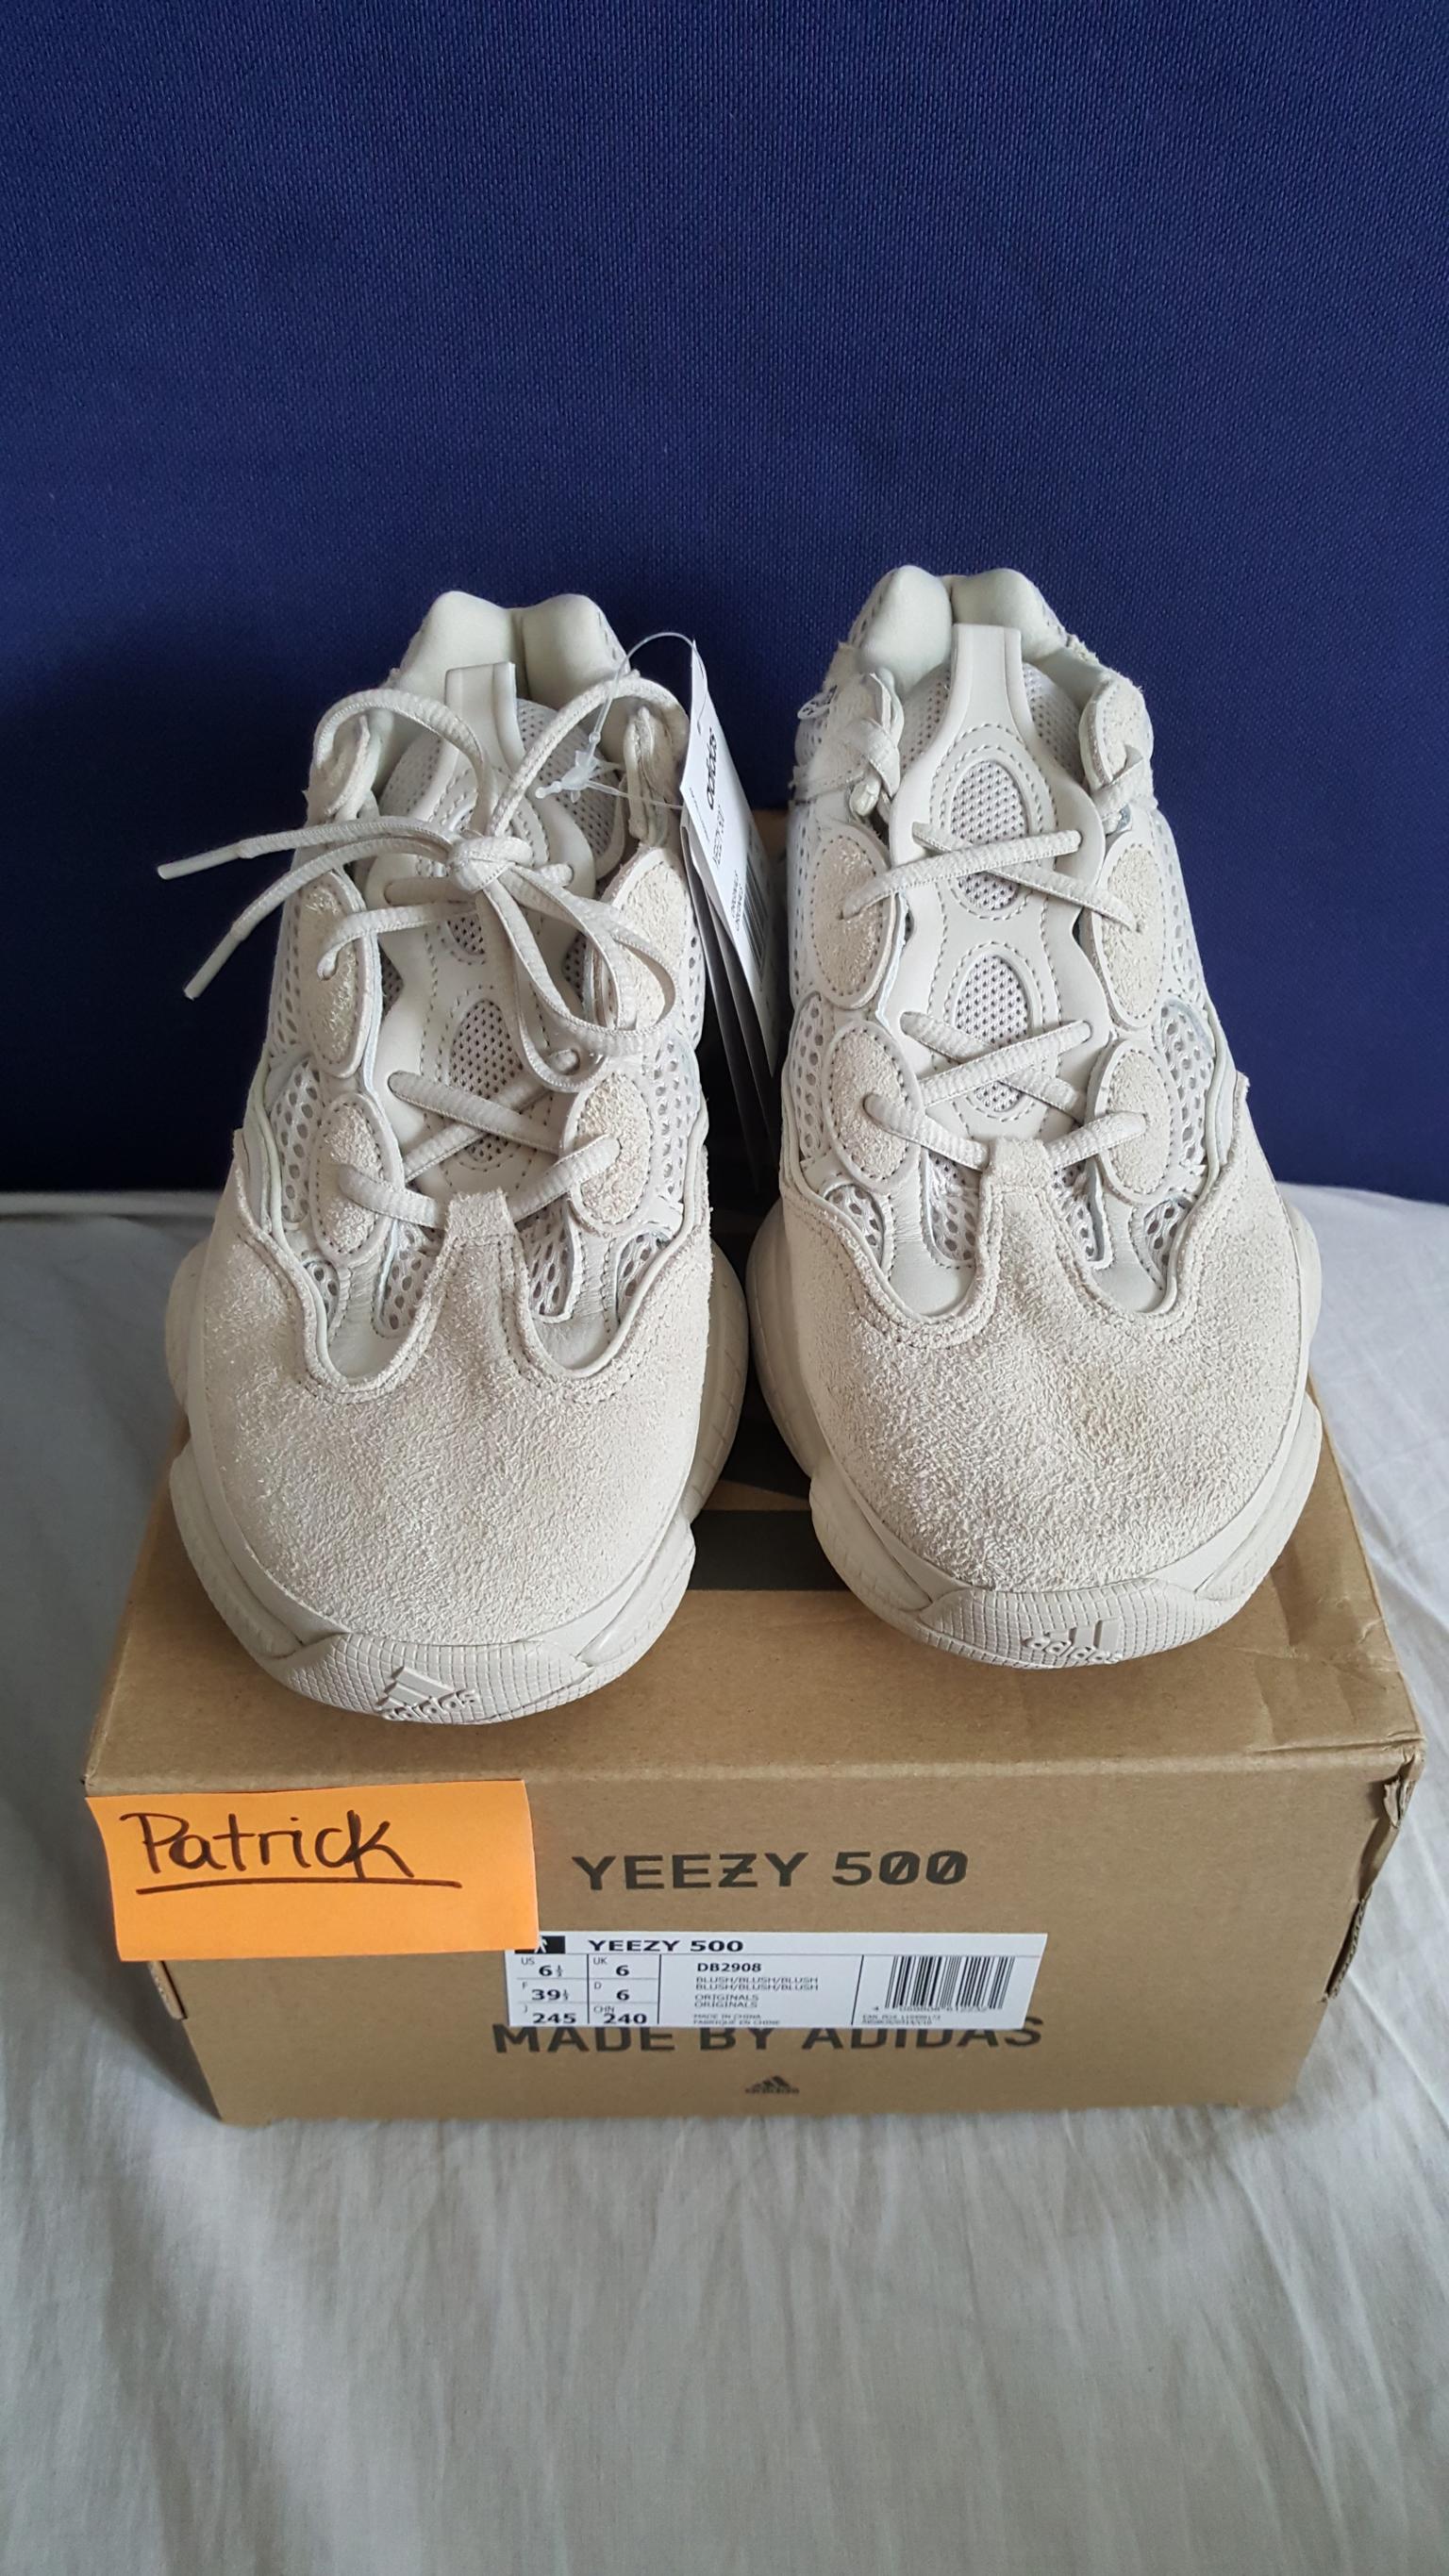 Adidas YEEZY 500 Size 39 in 80331 